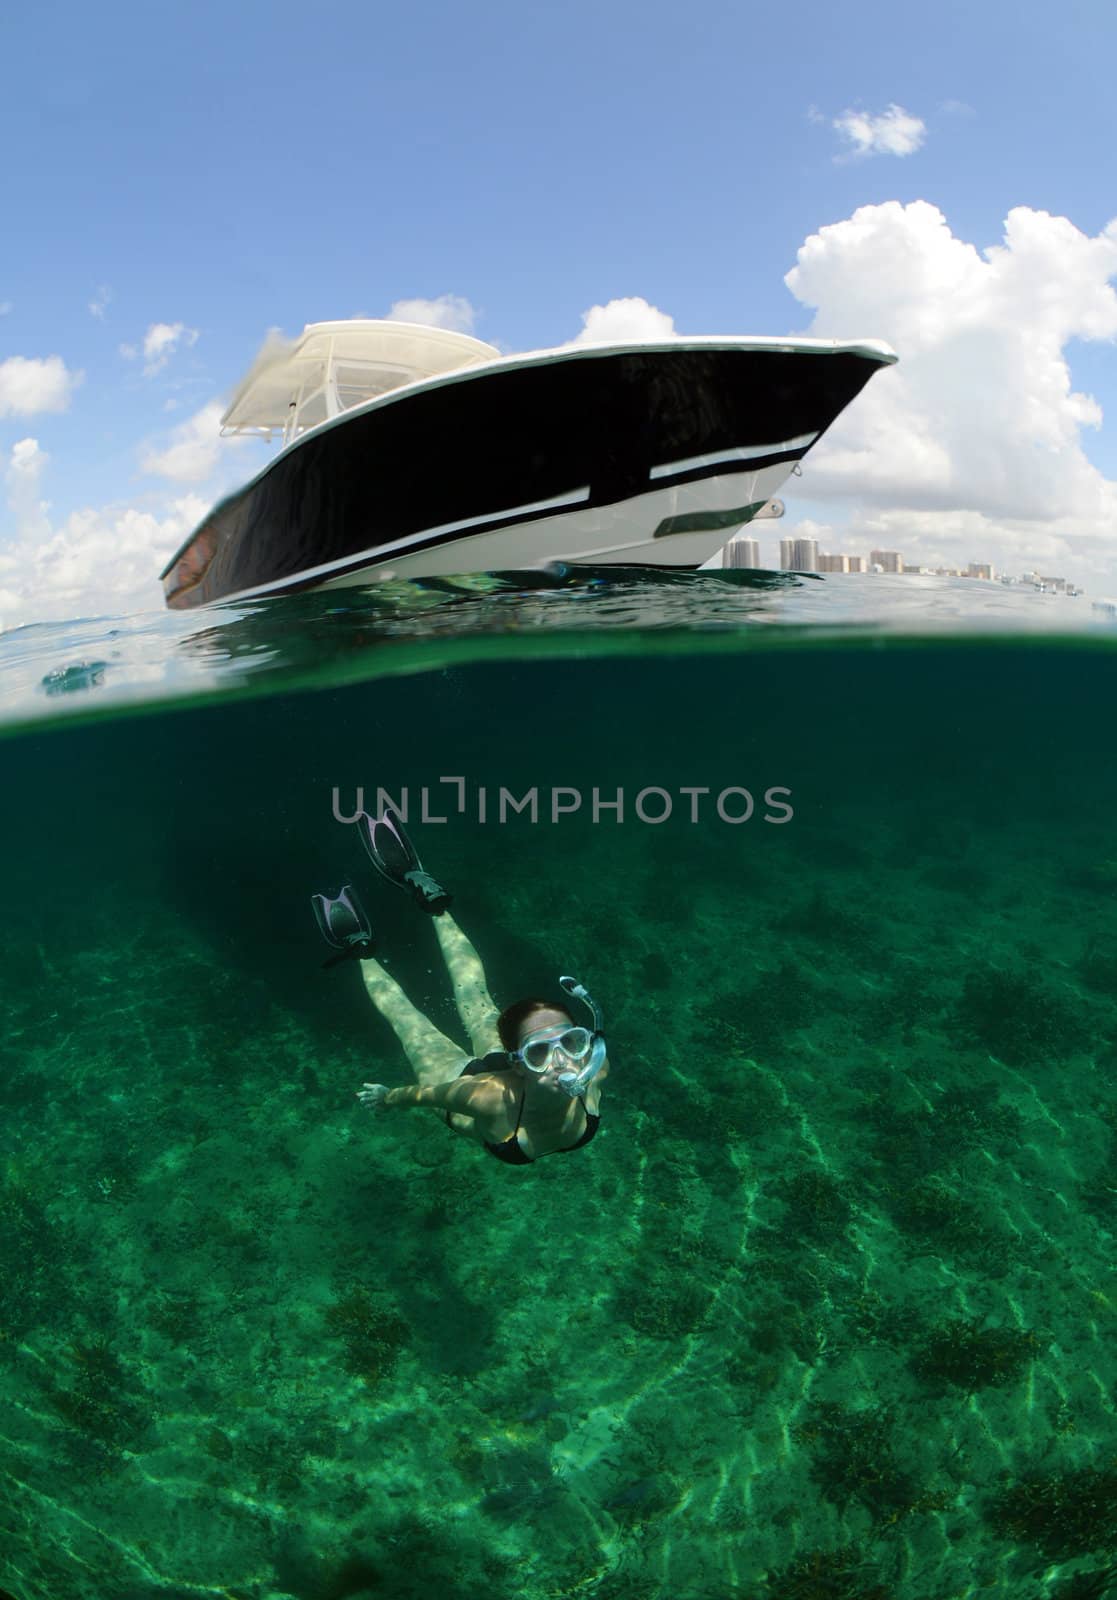 Pretty woman snorkeling underwater with boat and blue sky in background